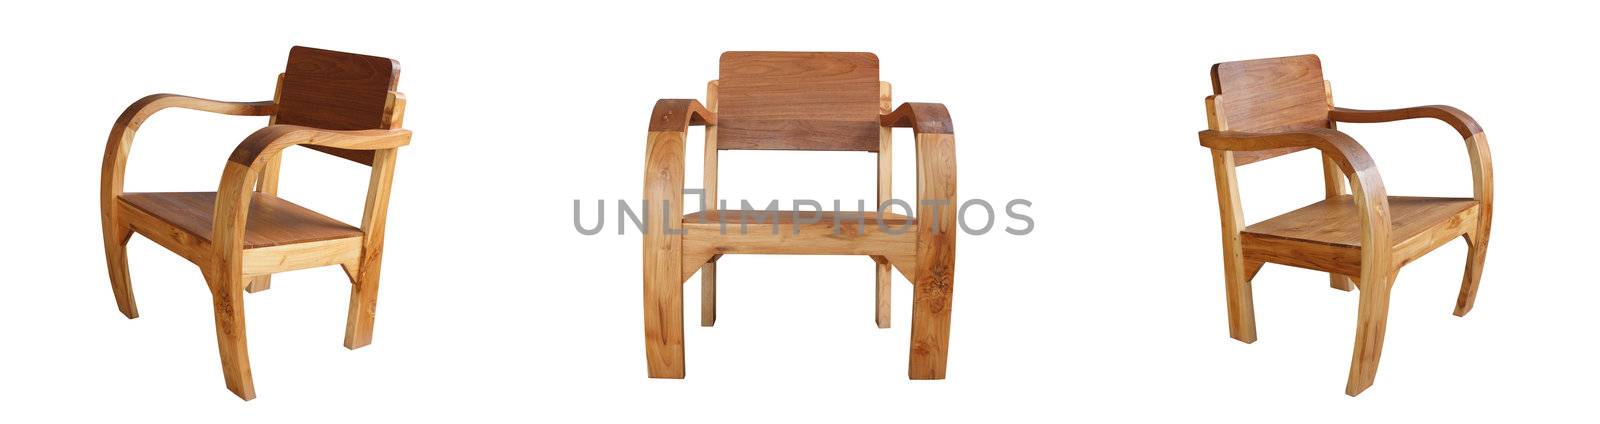 Wooden chairs